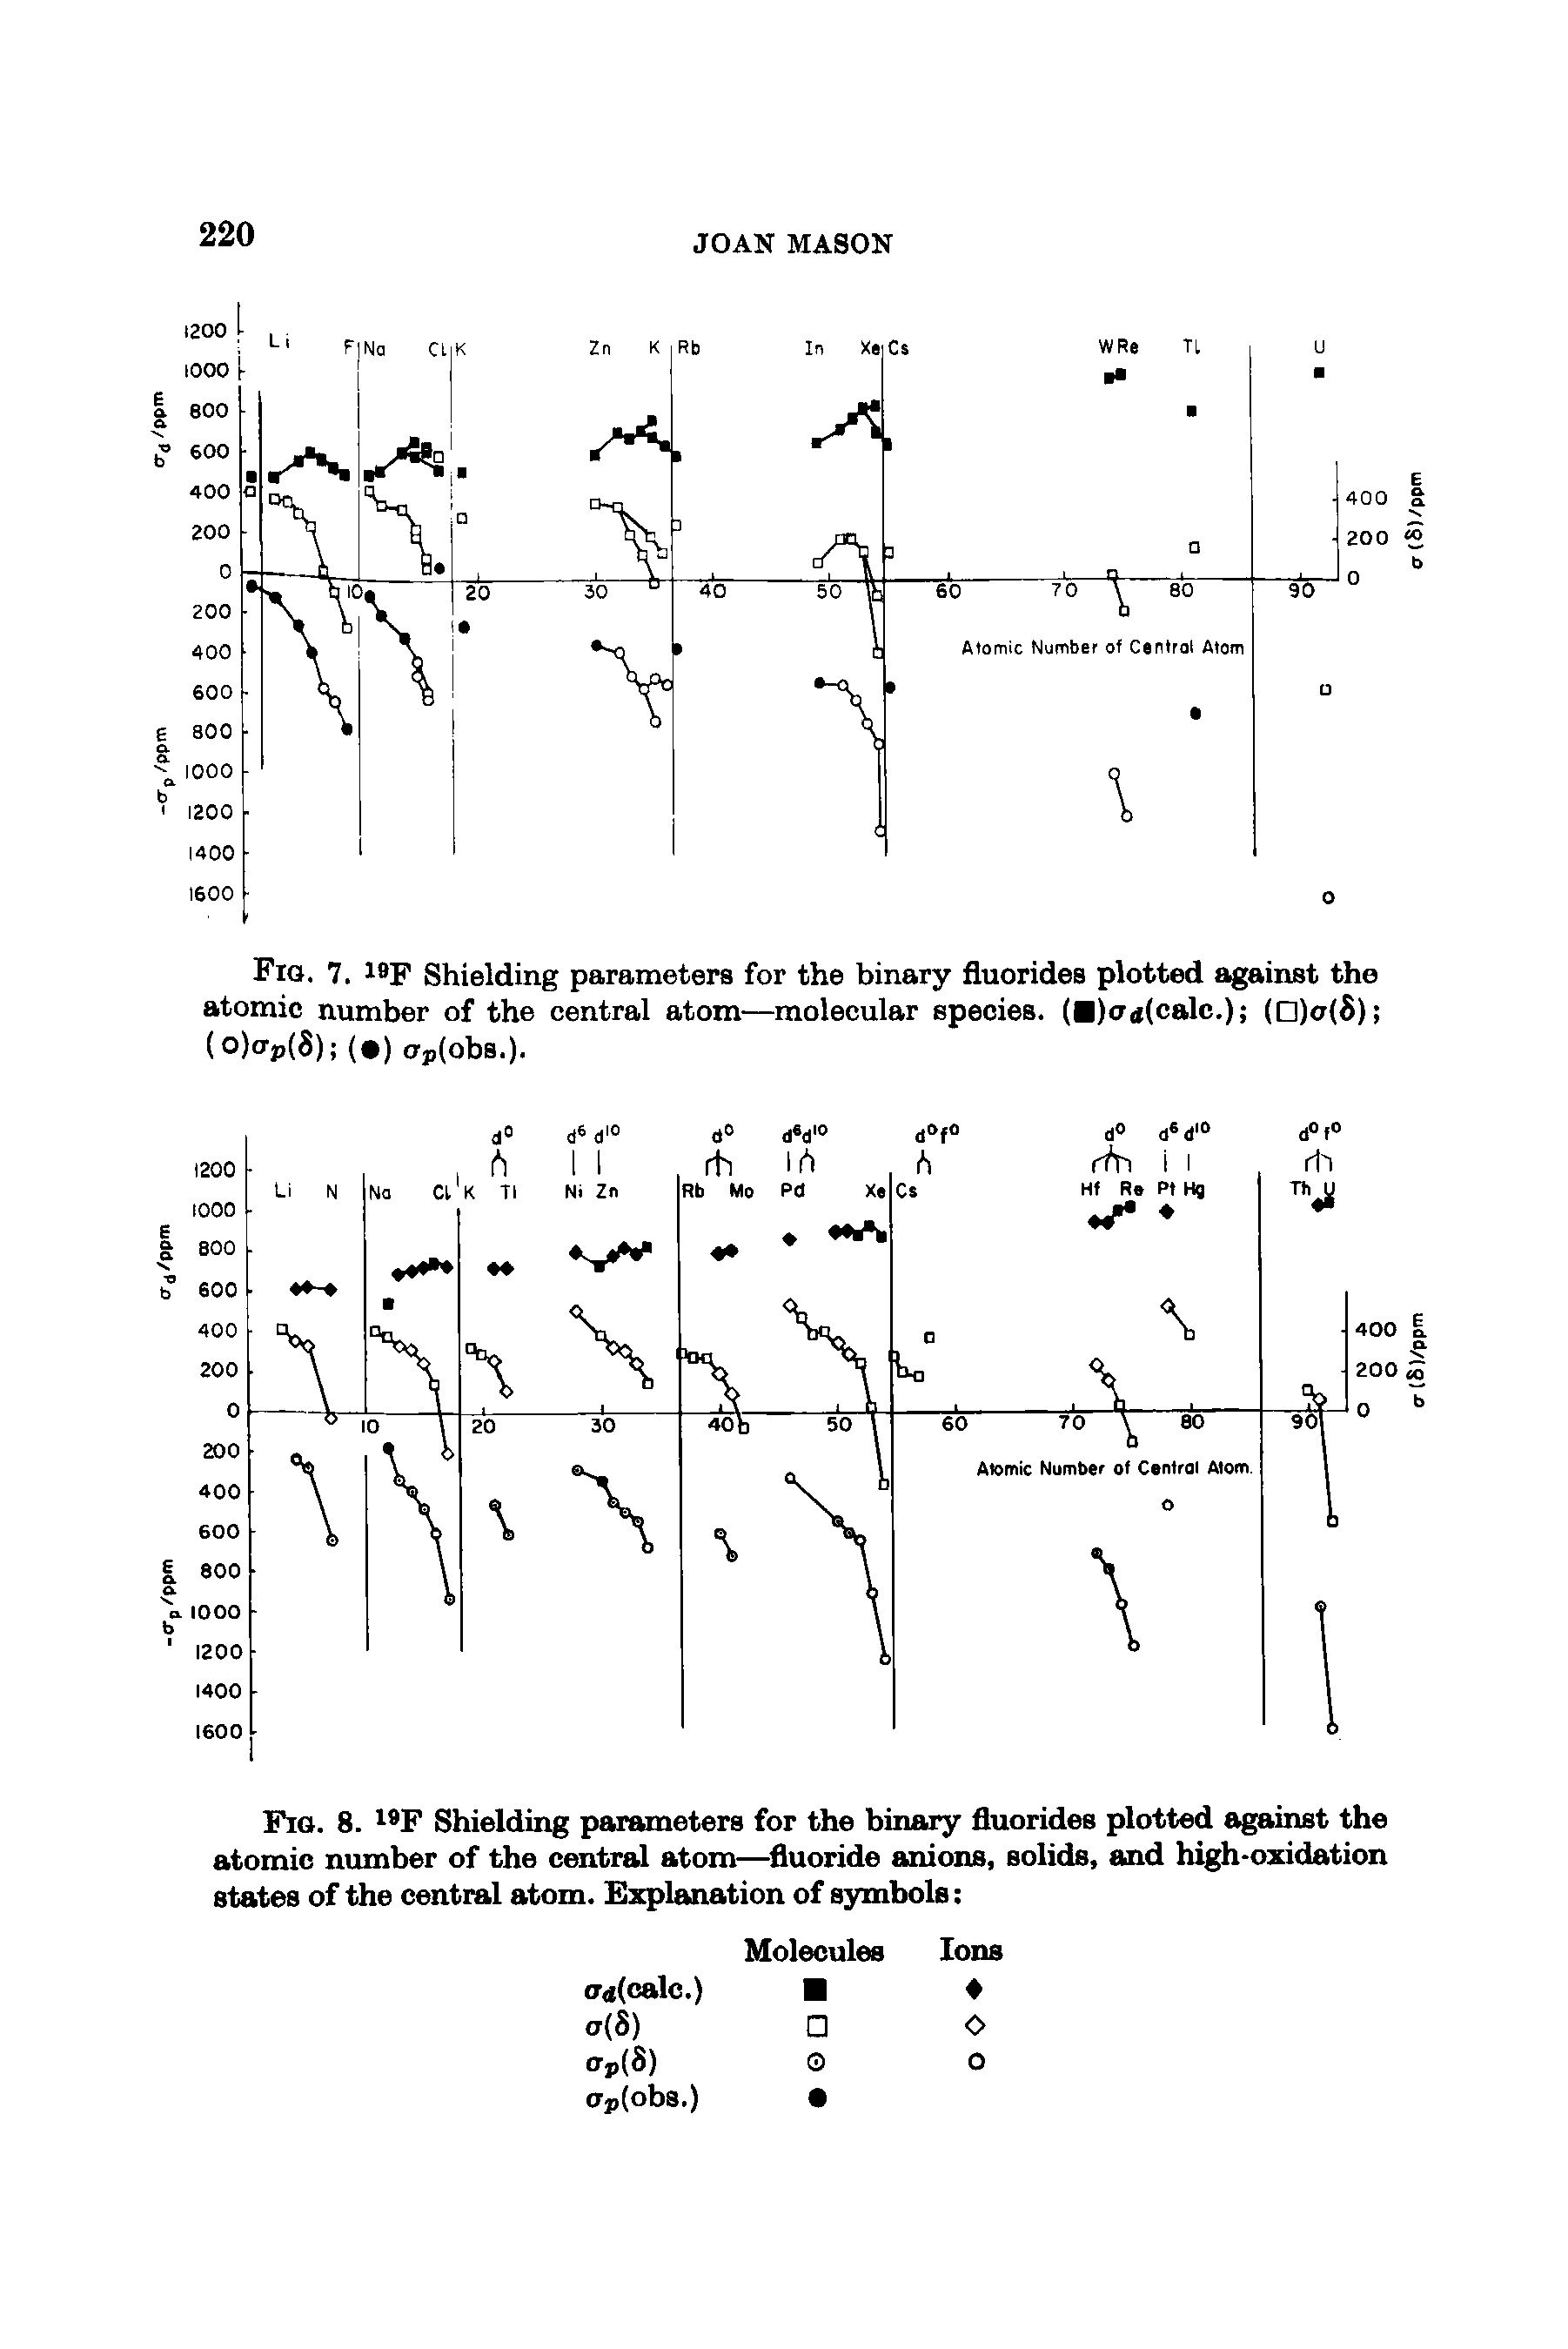 Fig. 8. F Shielding parameters for the binary fluorides plotted against the atomic number of the central atom— fluoride anions, solids, and high-oxidation states of the central atom. Explanation of symbols ...